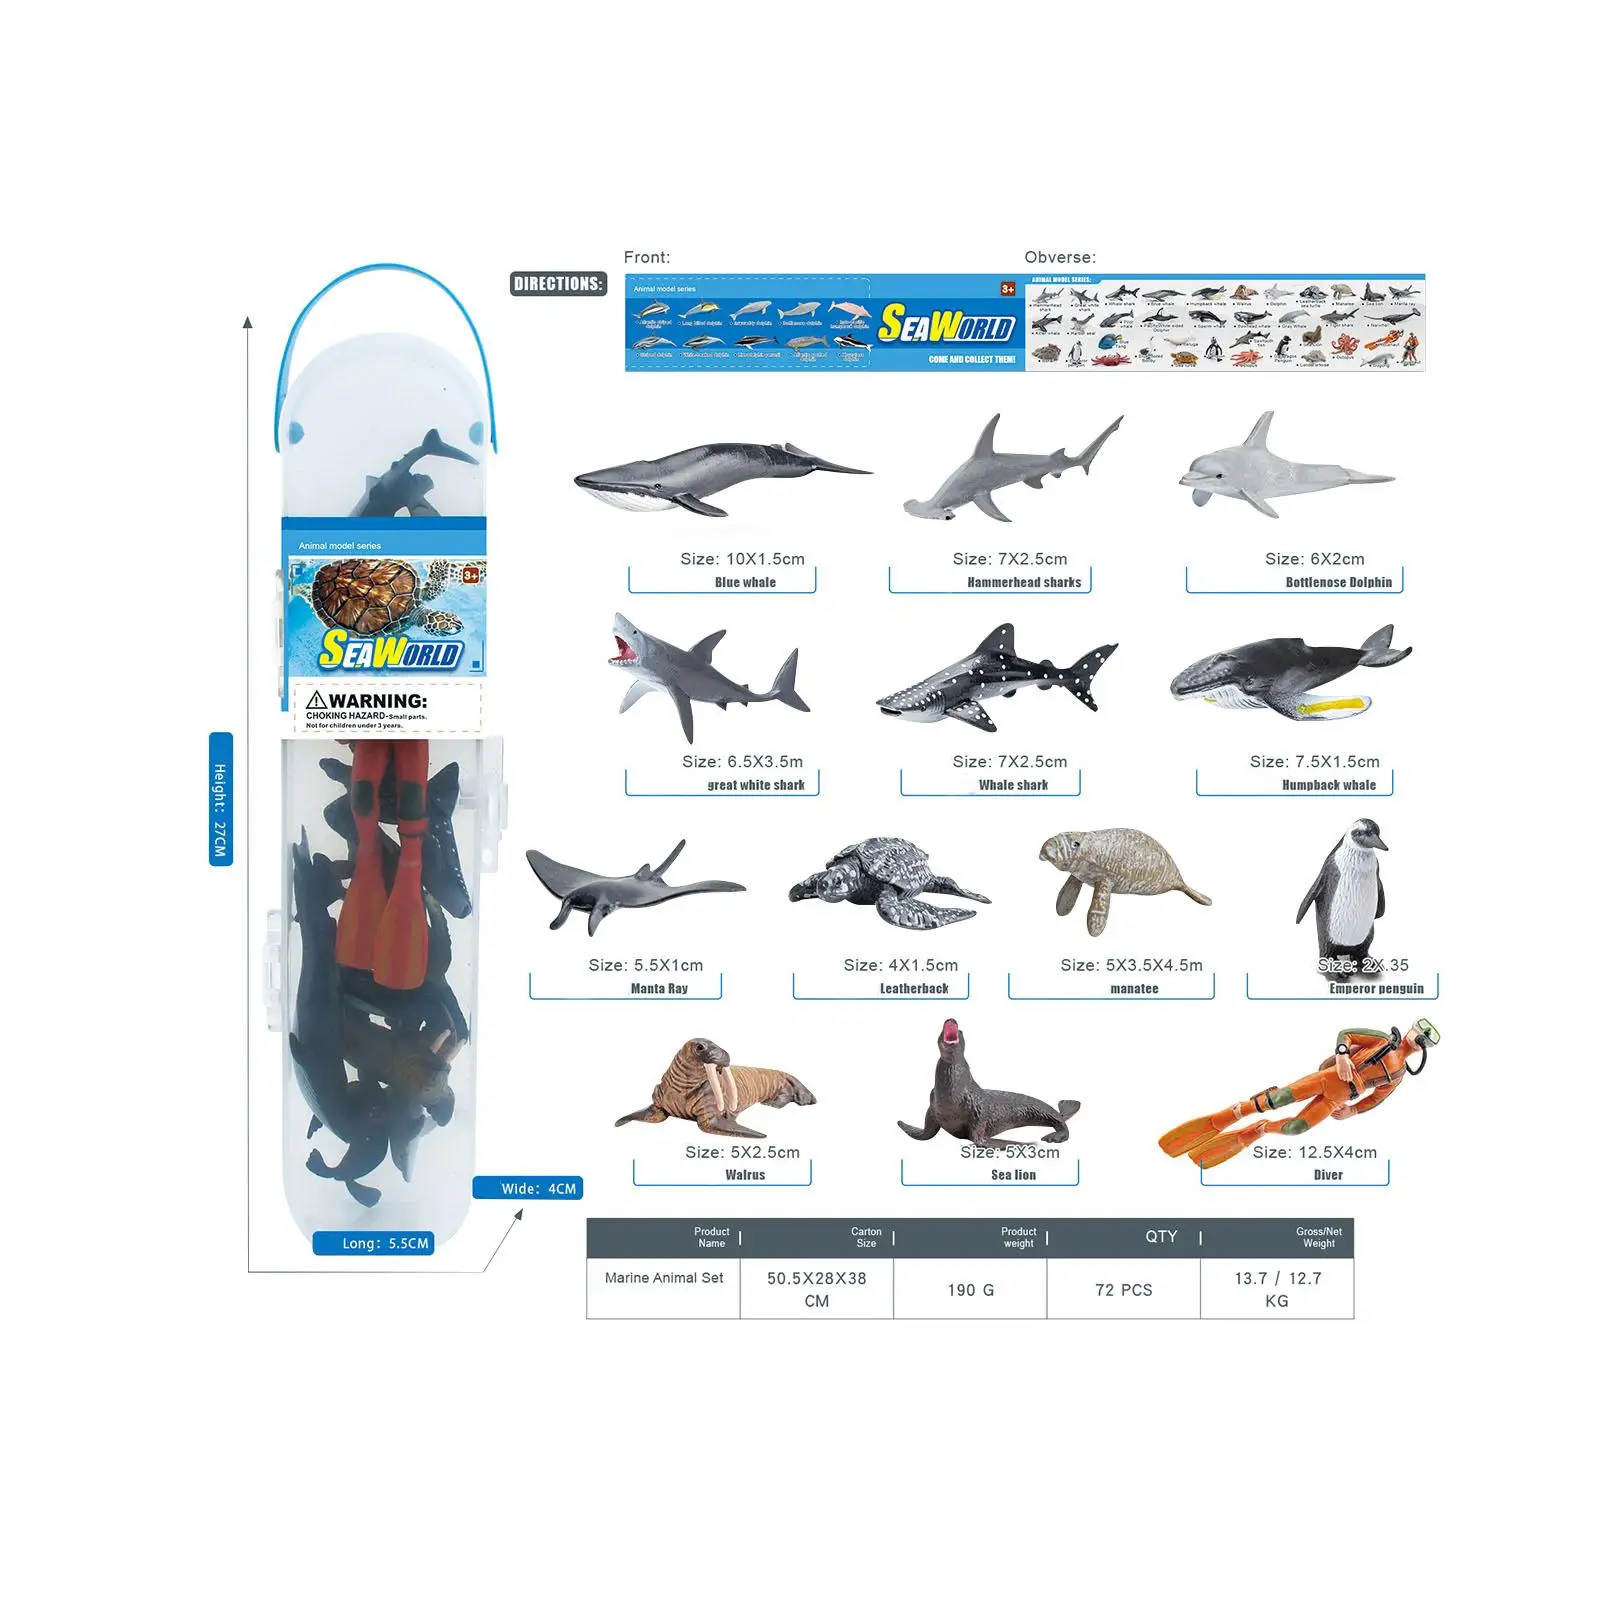 13 Pieces Marine Animal Set Mini Animal for Cognitive Toy Educational Toys Boys Girls Learning Activities Cake Topper